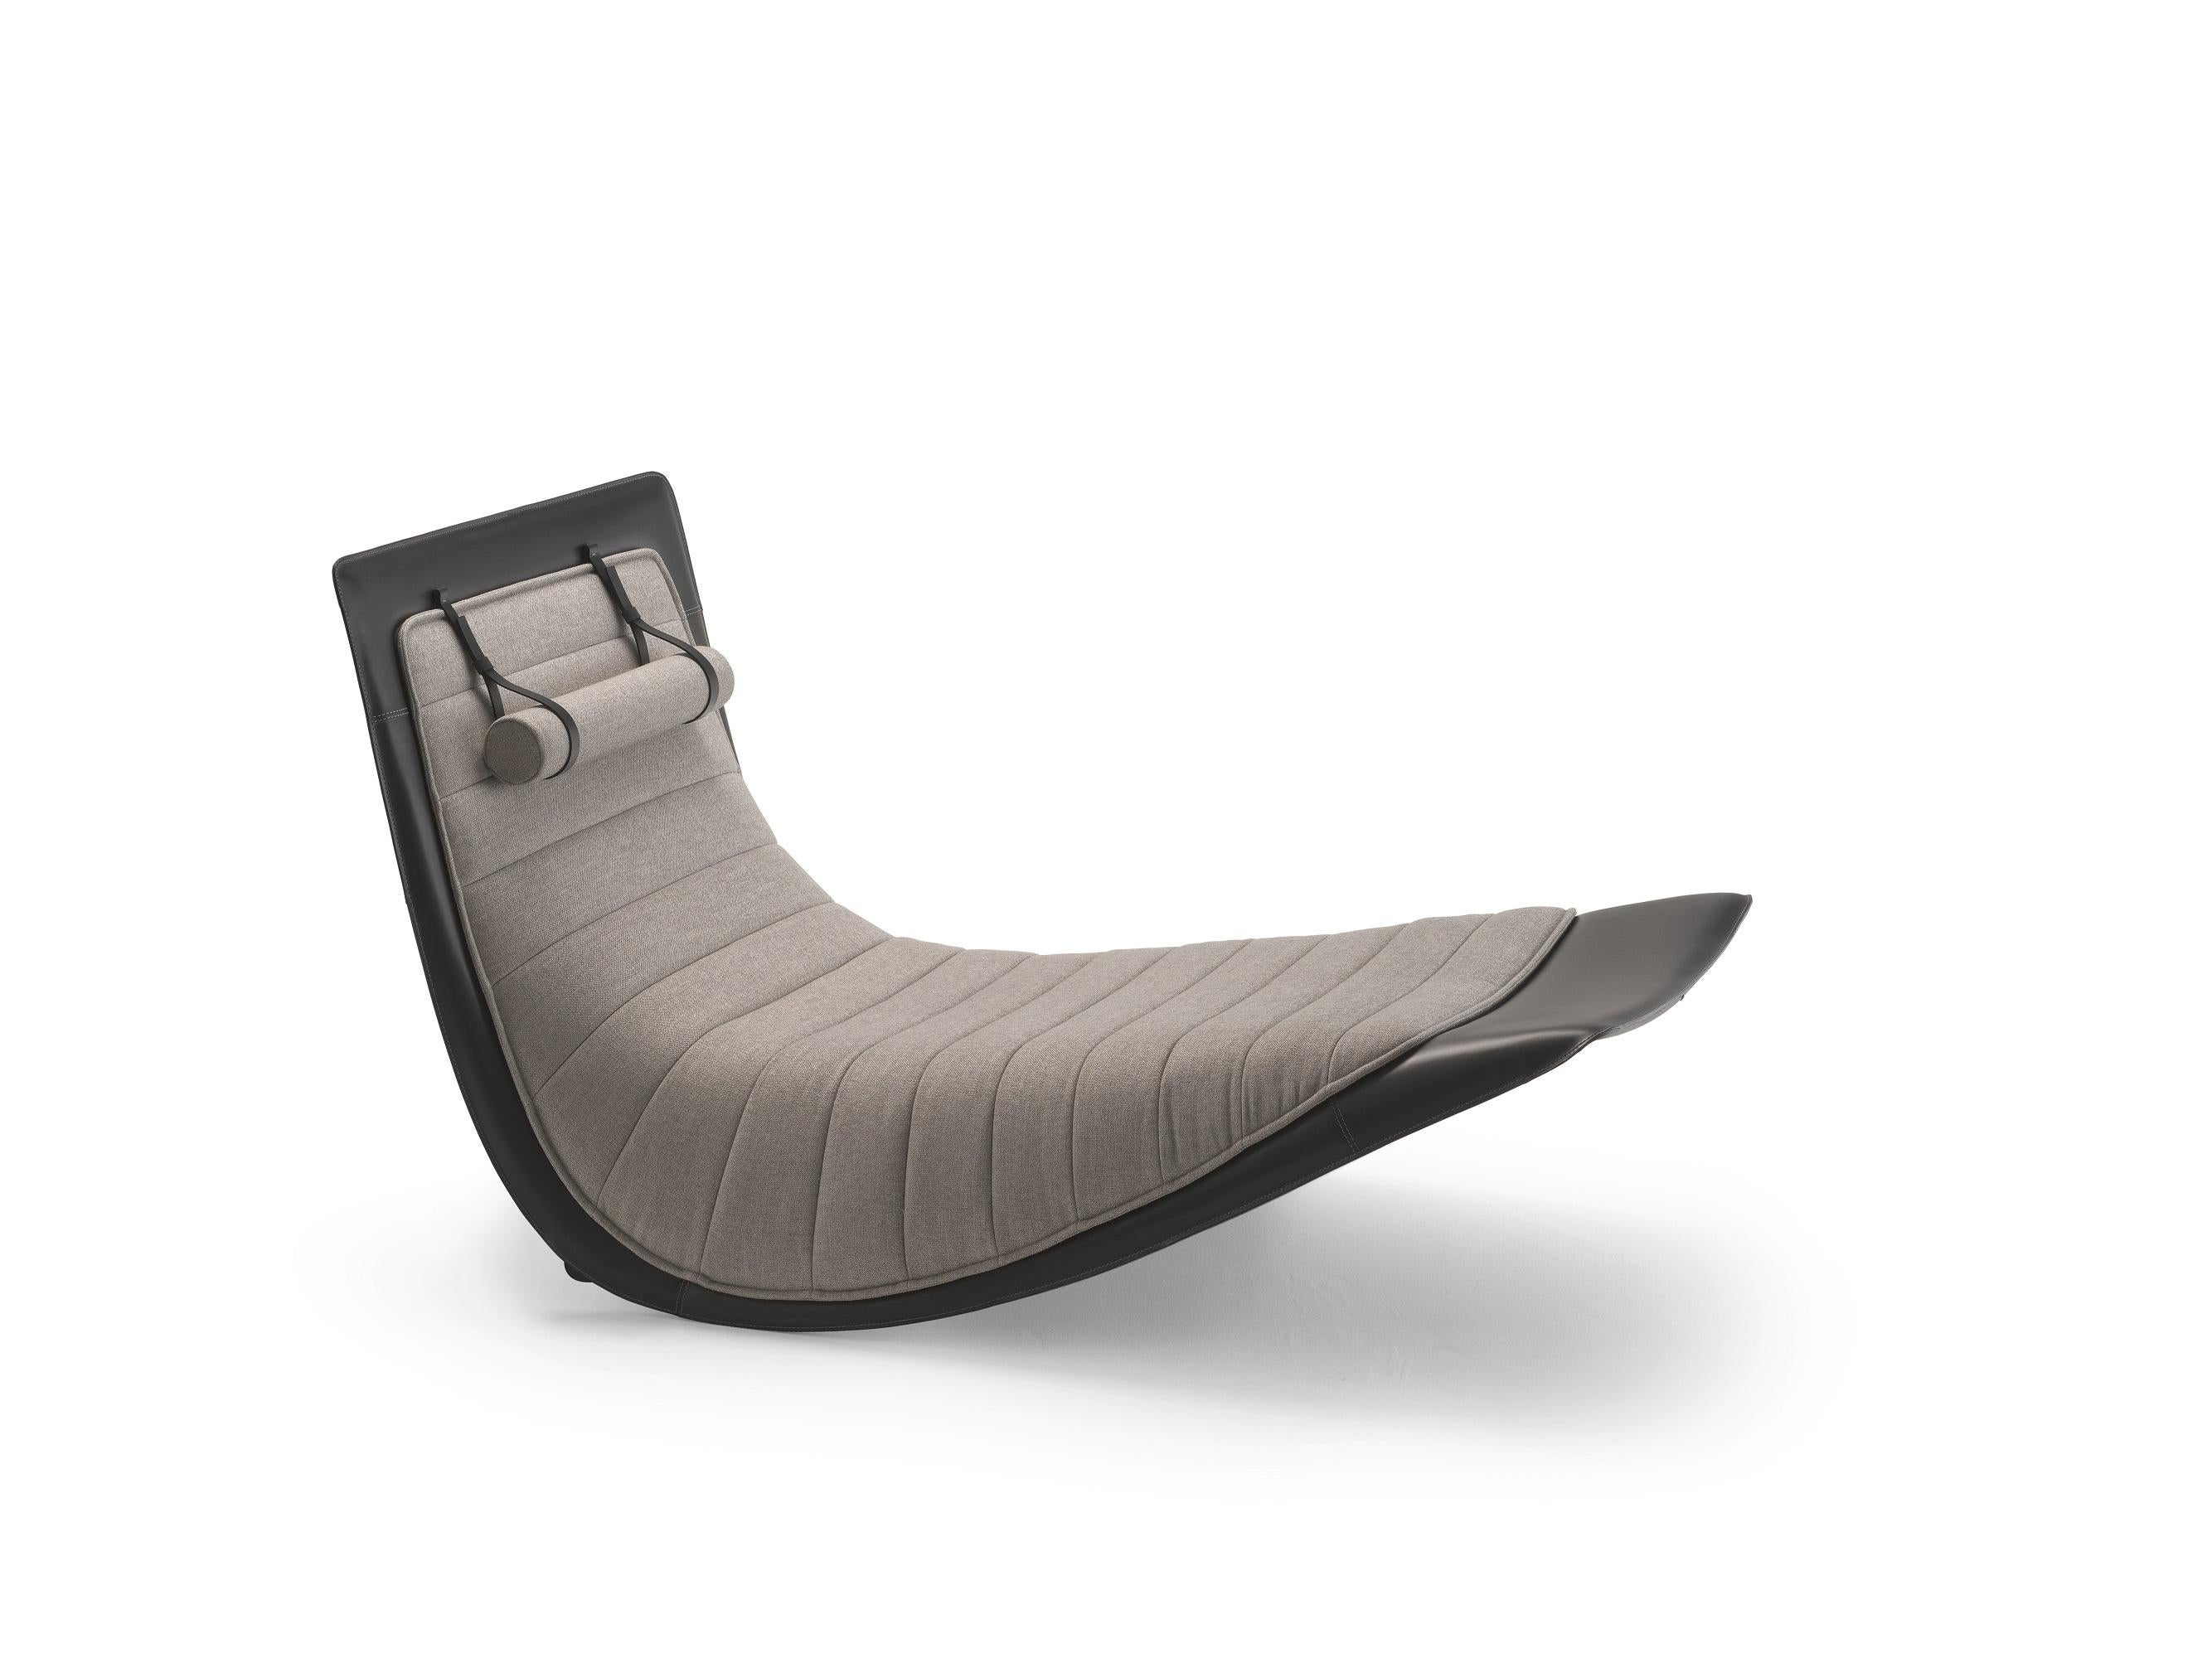 Zanotta Rider Tilting Chaise Longue in Grey Fabric by Ludovica+Roberto Palomba

Stiff polyurethane frame with upholstery in graduated polyurethane. Frame covered with cowhide 95. Removable topper
made of polyurethane/heat-bound polyester fibre,